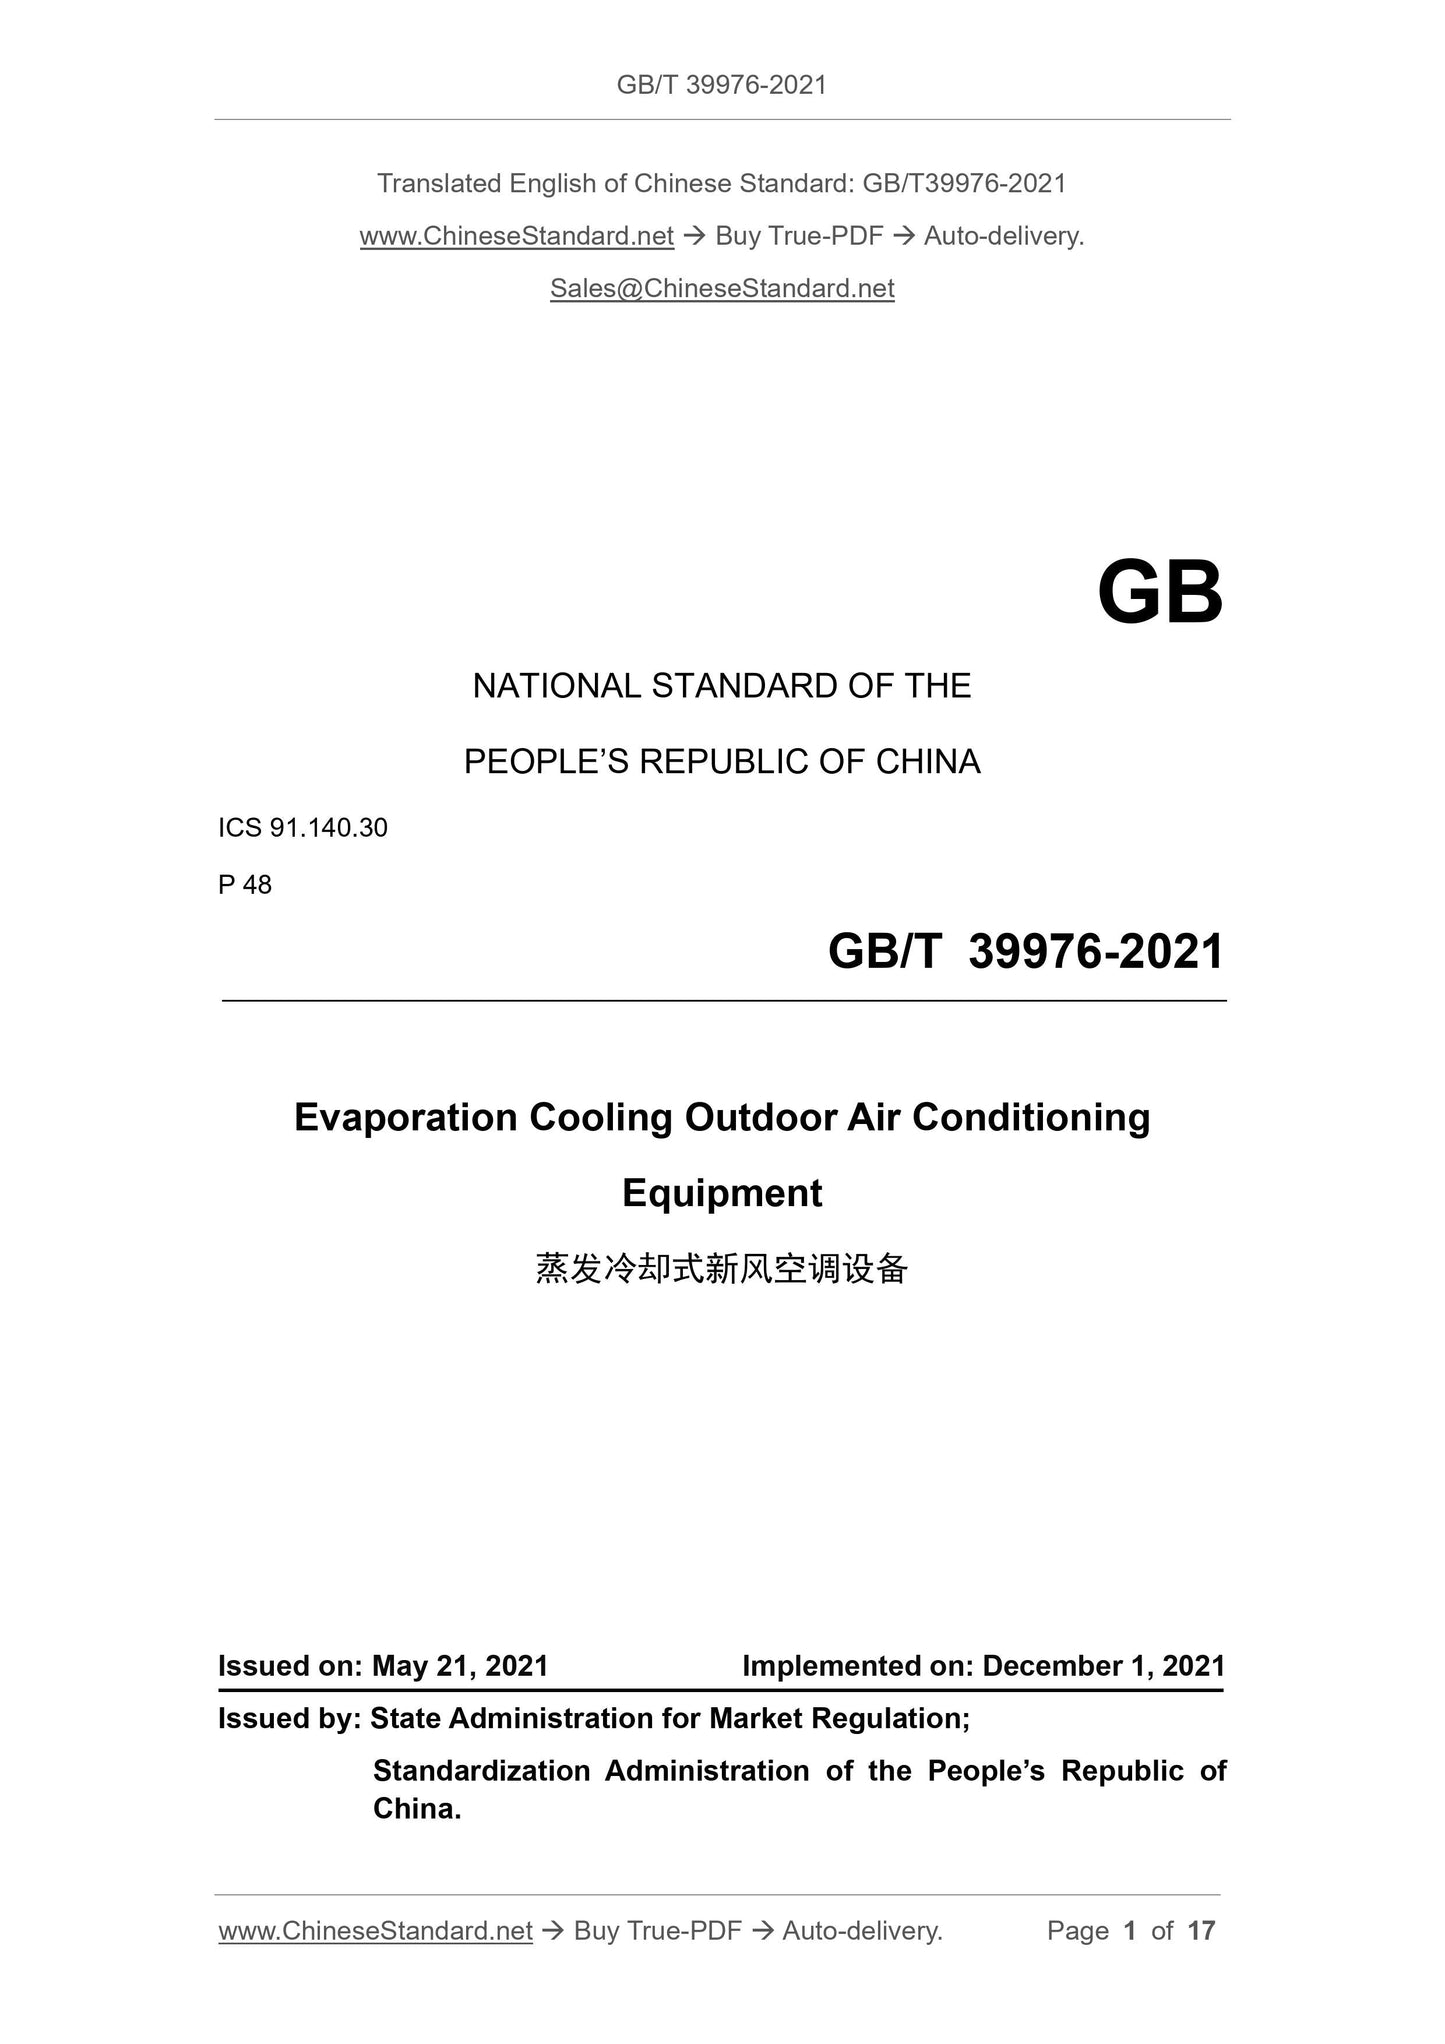 GB/T 39976-2021 Page 1